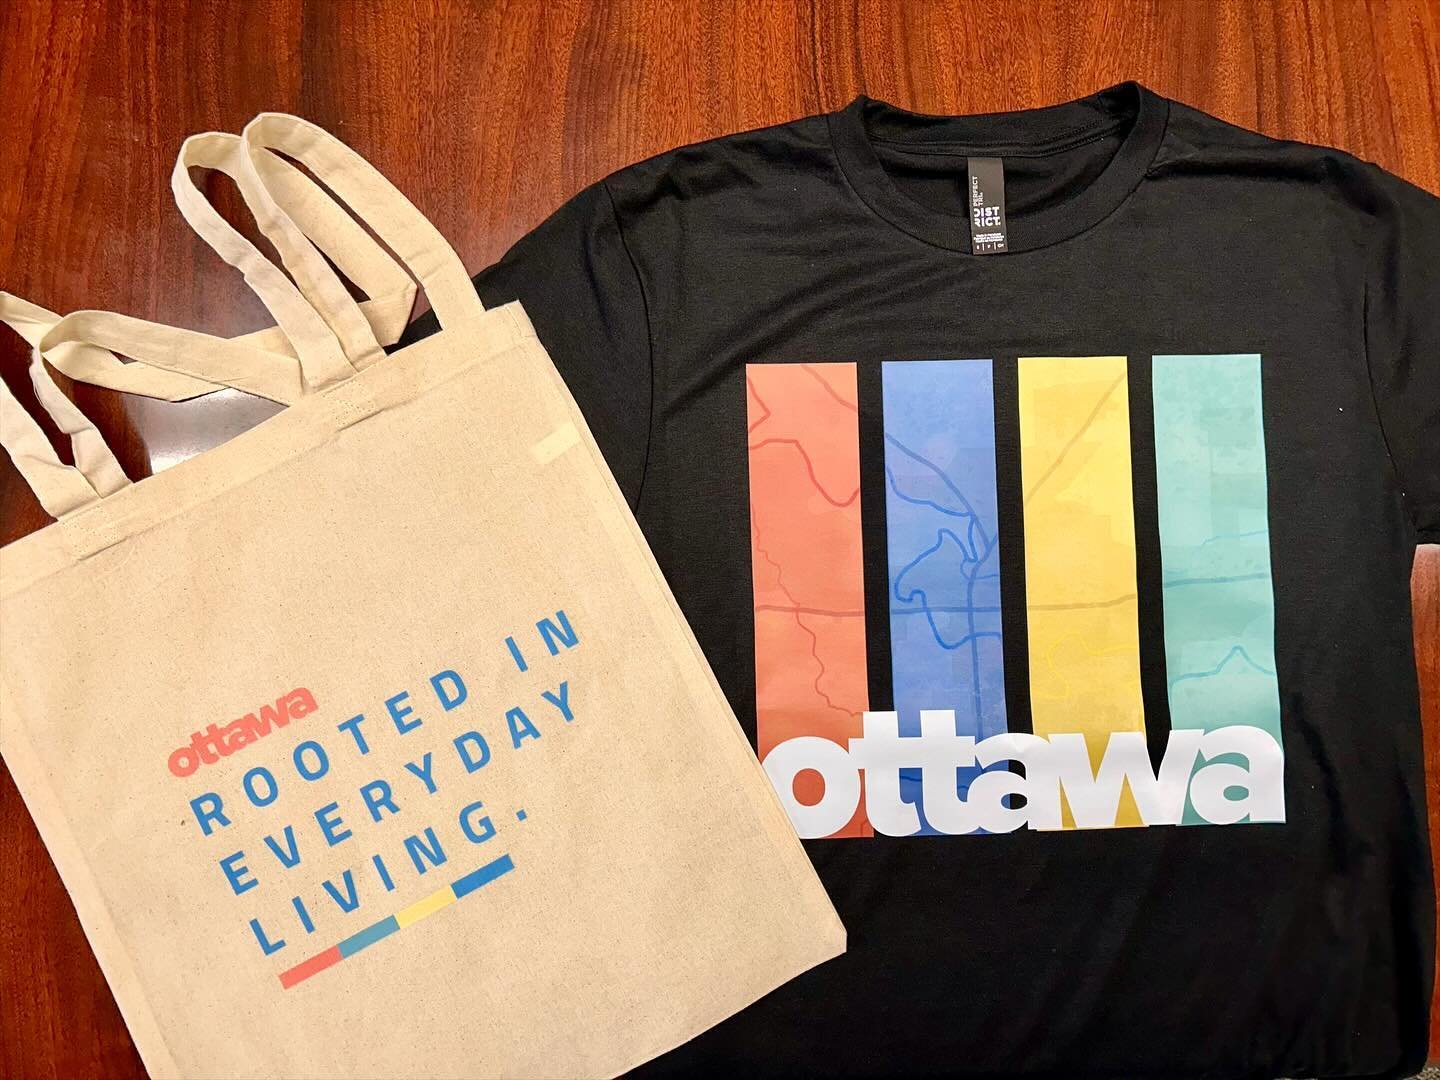 Ottawa swag is in! 

$20 for the shirts and $12 for the bags! We will have these out and about with us at our events this year! 

If you were curious about the graphic in the colors on the shirt &hellip; it is a map of Ottawa!